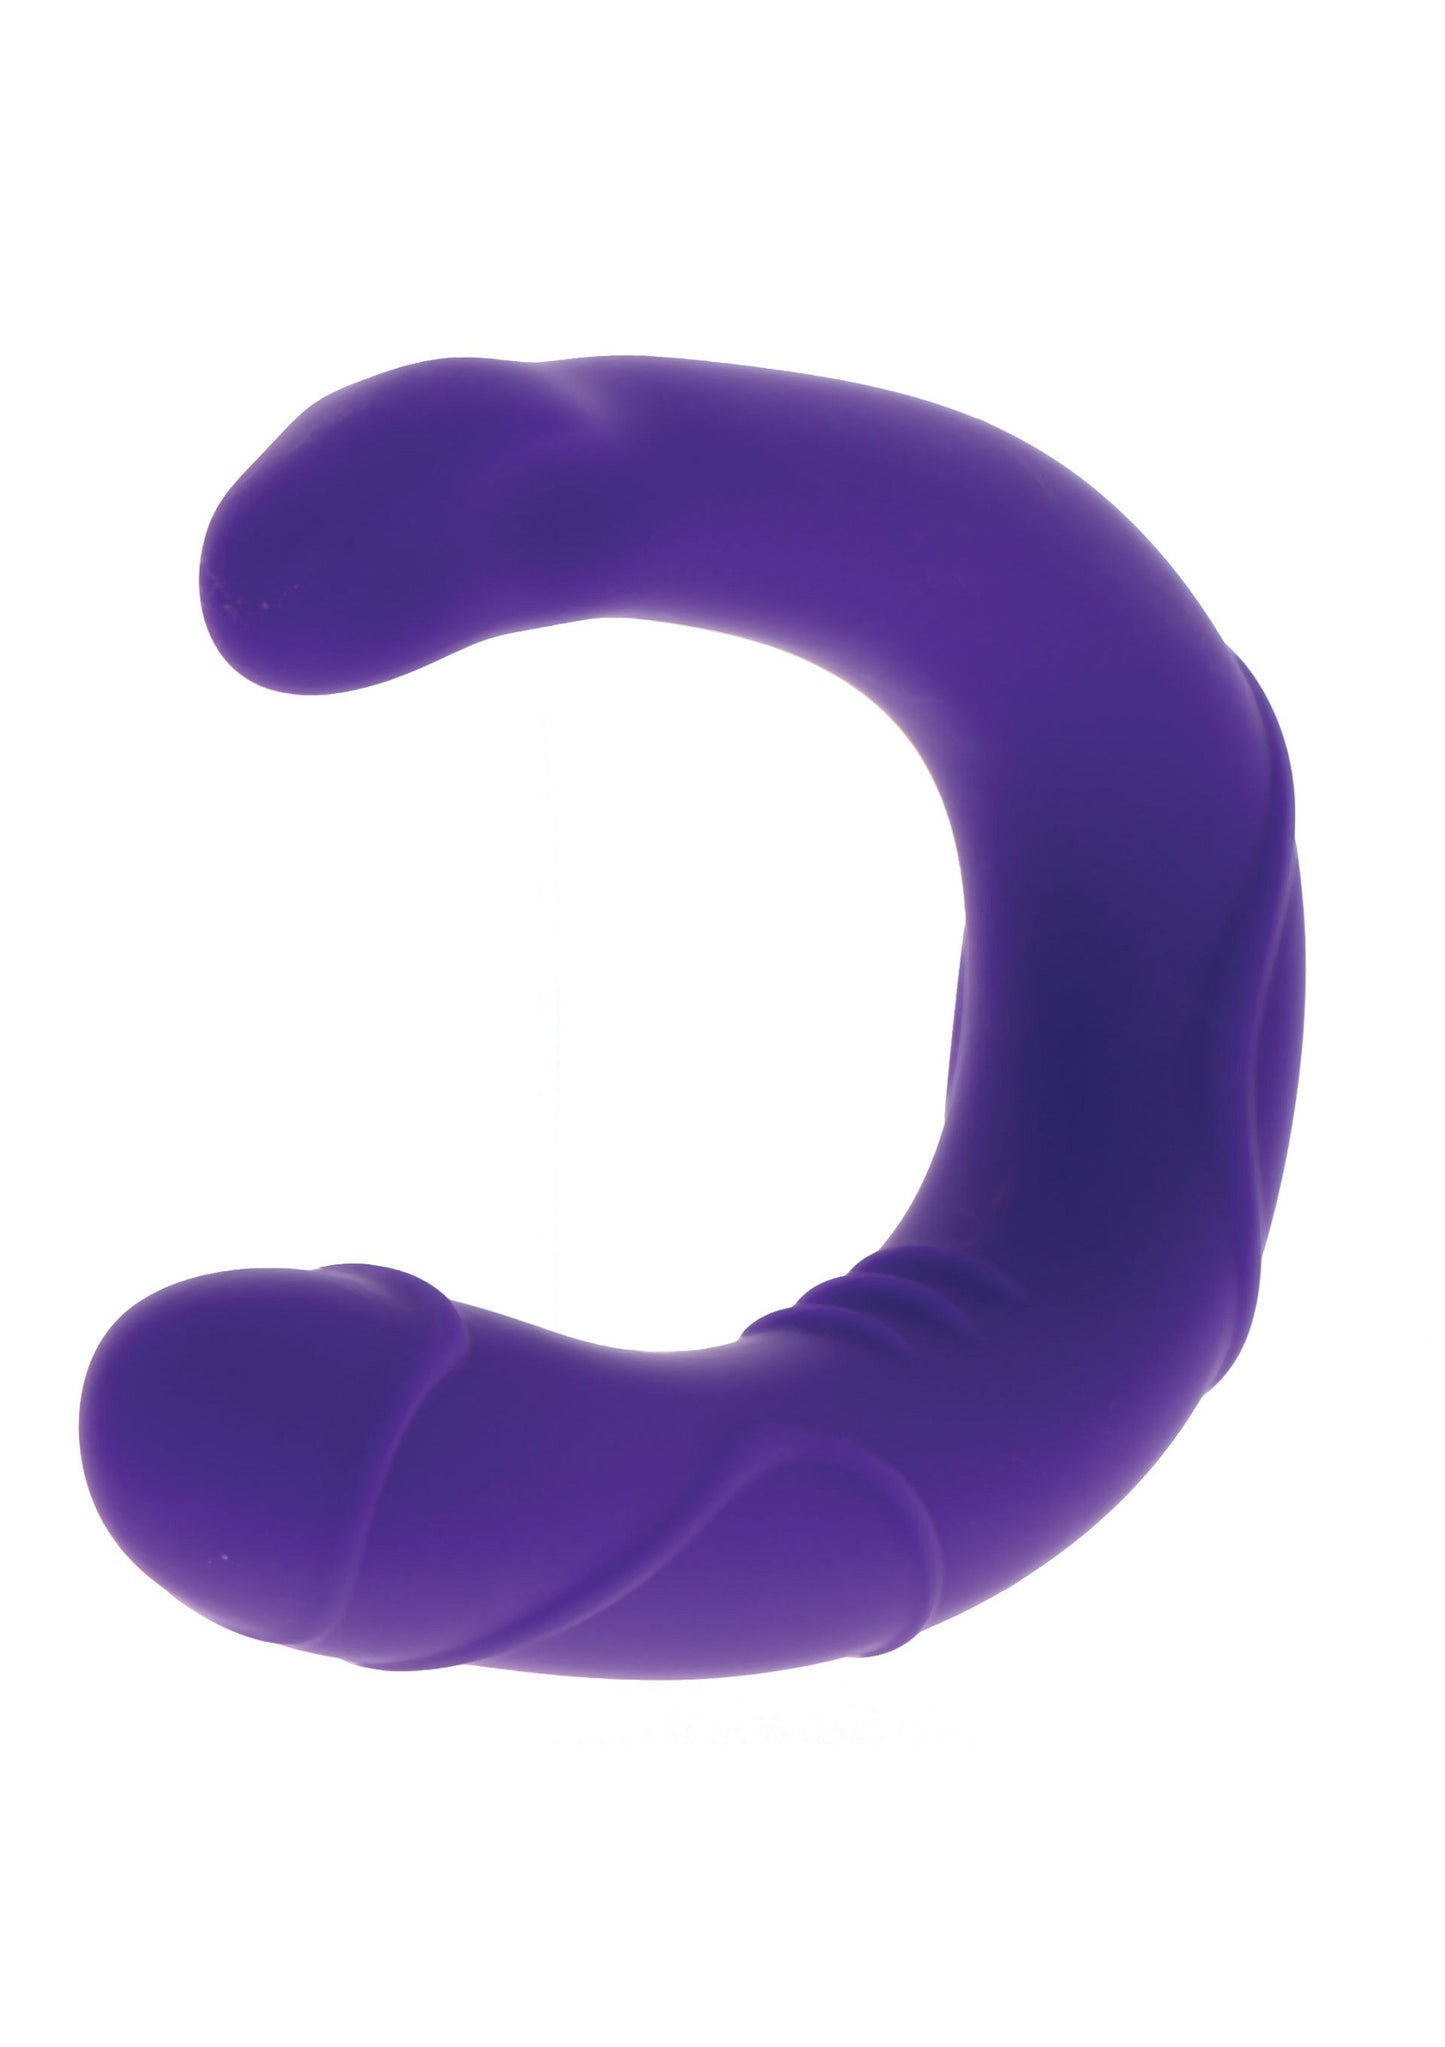 ToyJoy Get Real Vogue Mini Double Dong PURPLE - 5